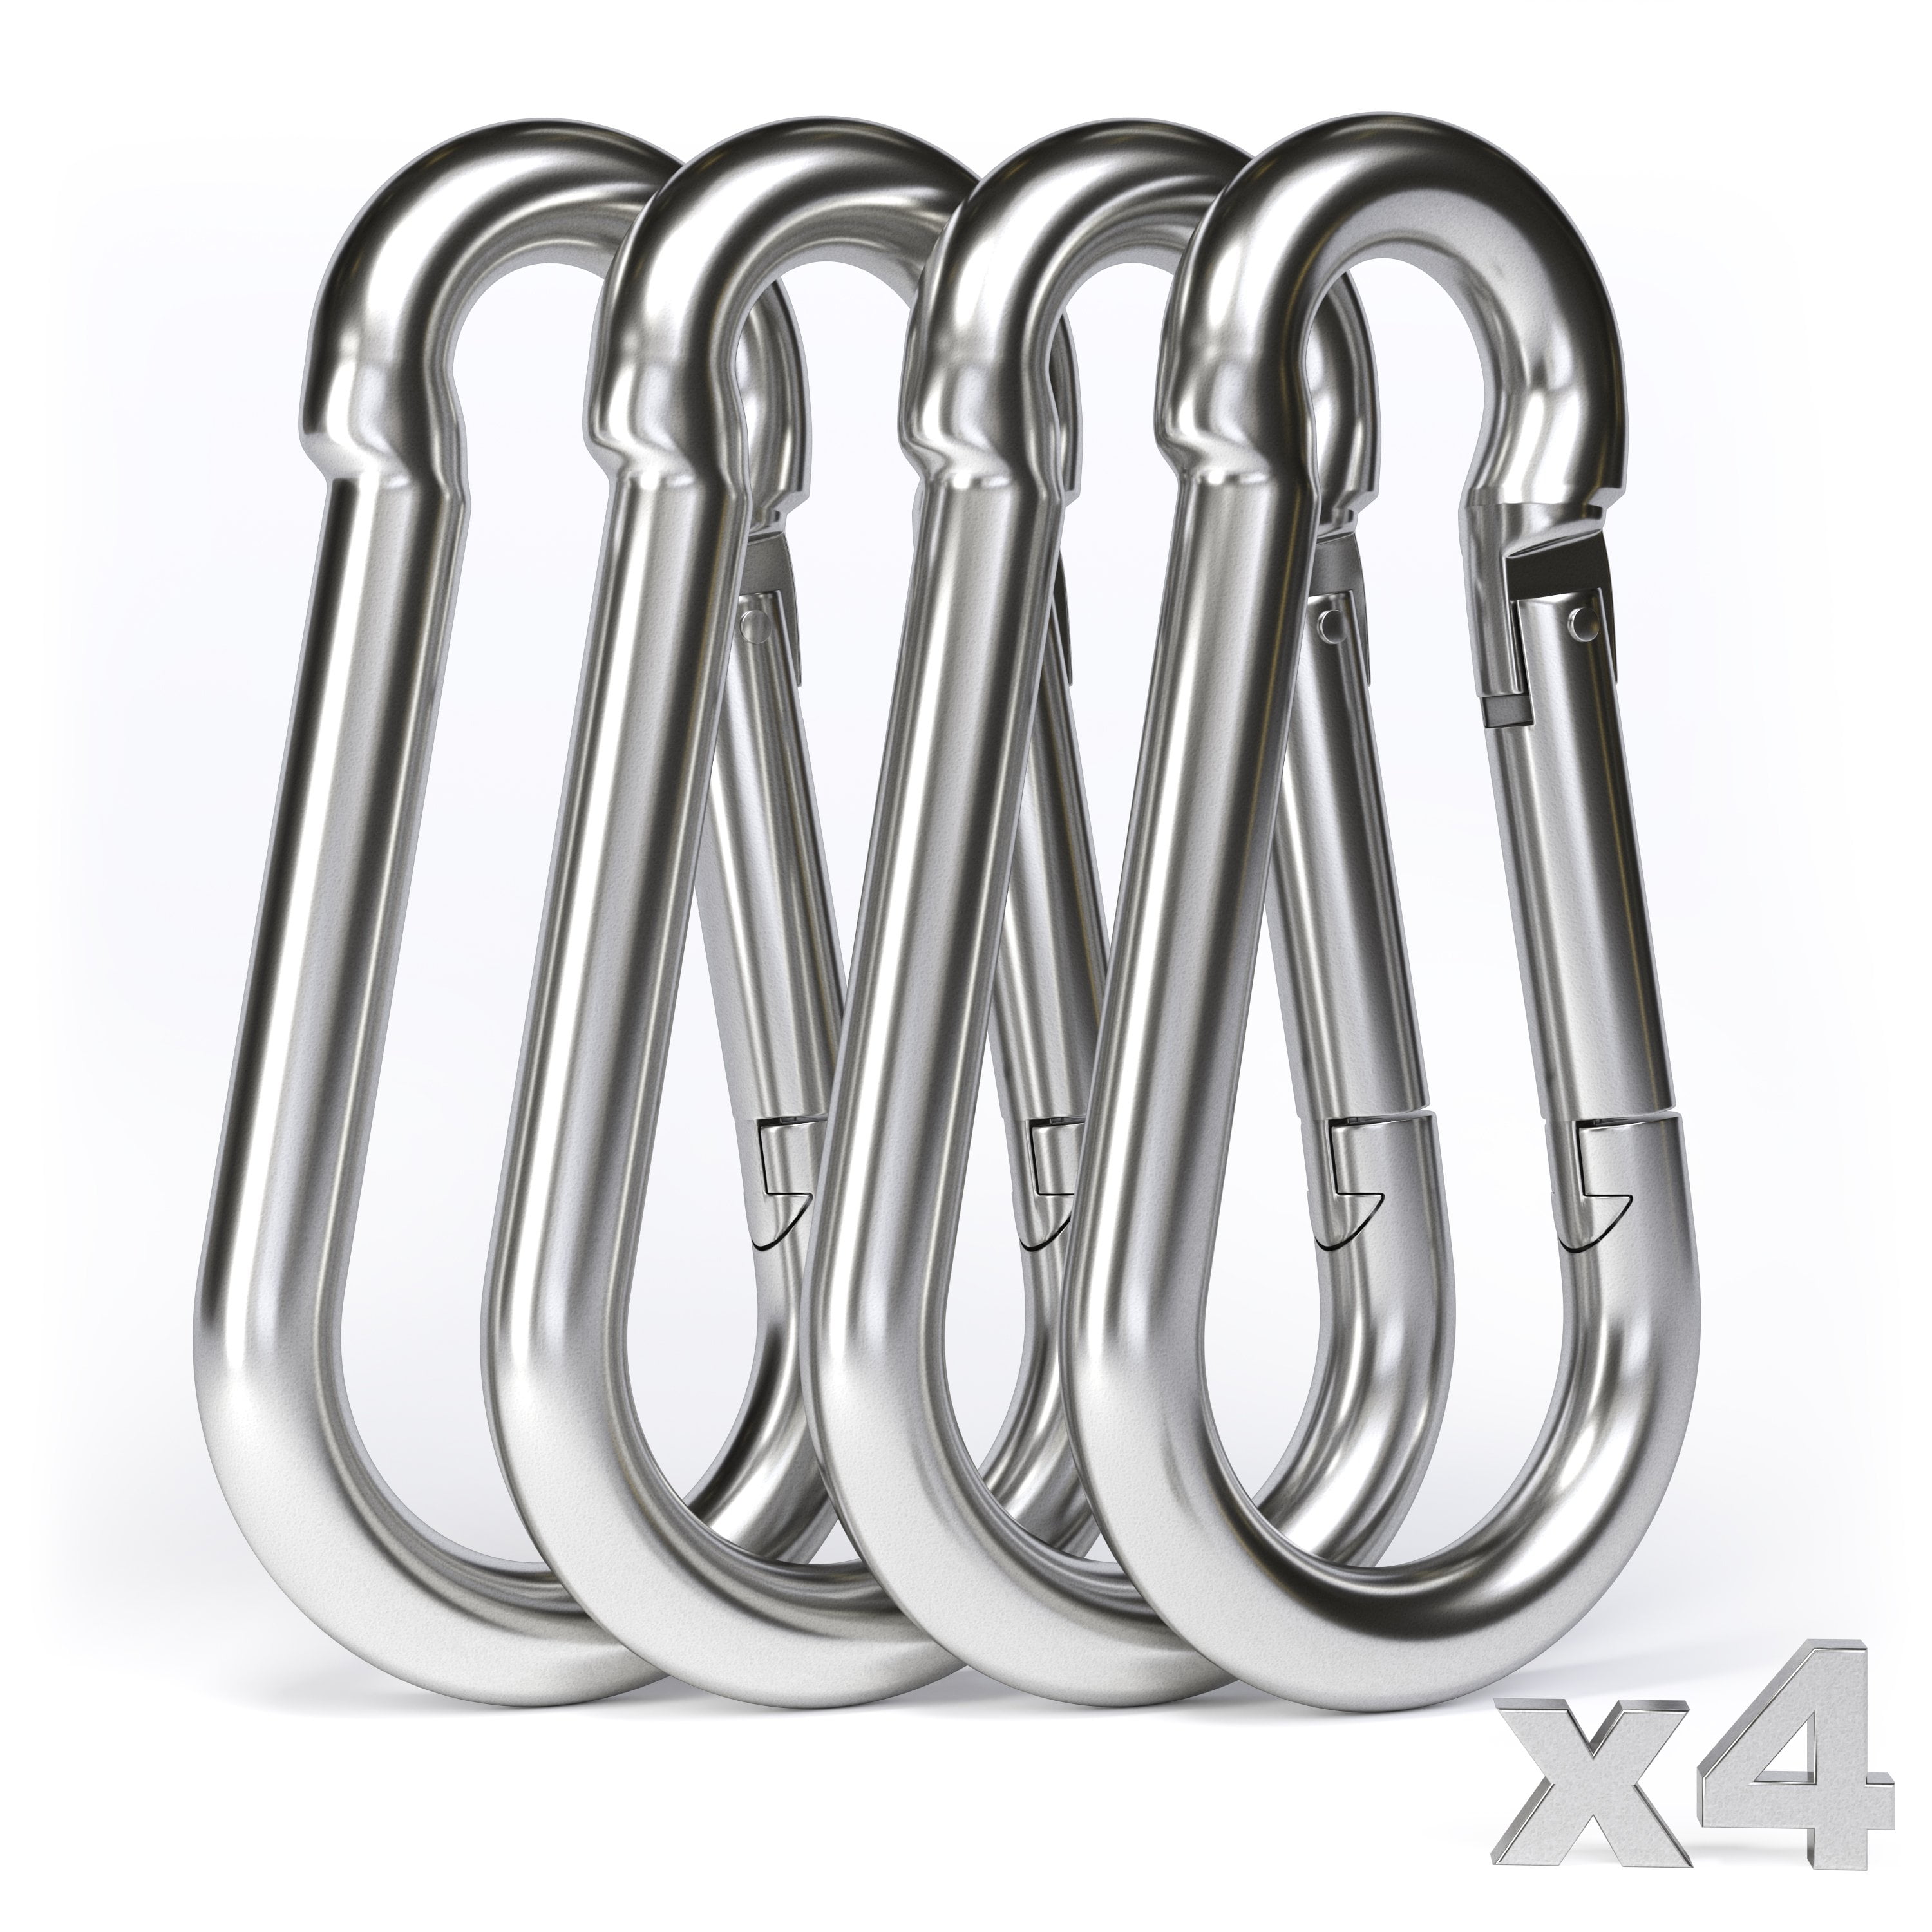 Carabiner Clip 304 Stainless Steel Key Buckle Snap Spring Clip Hook Camping 